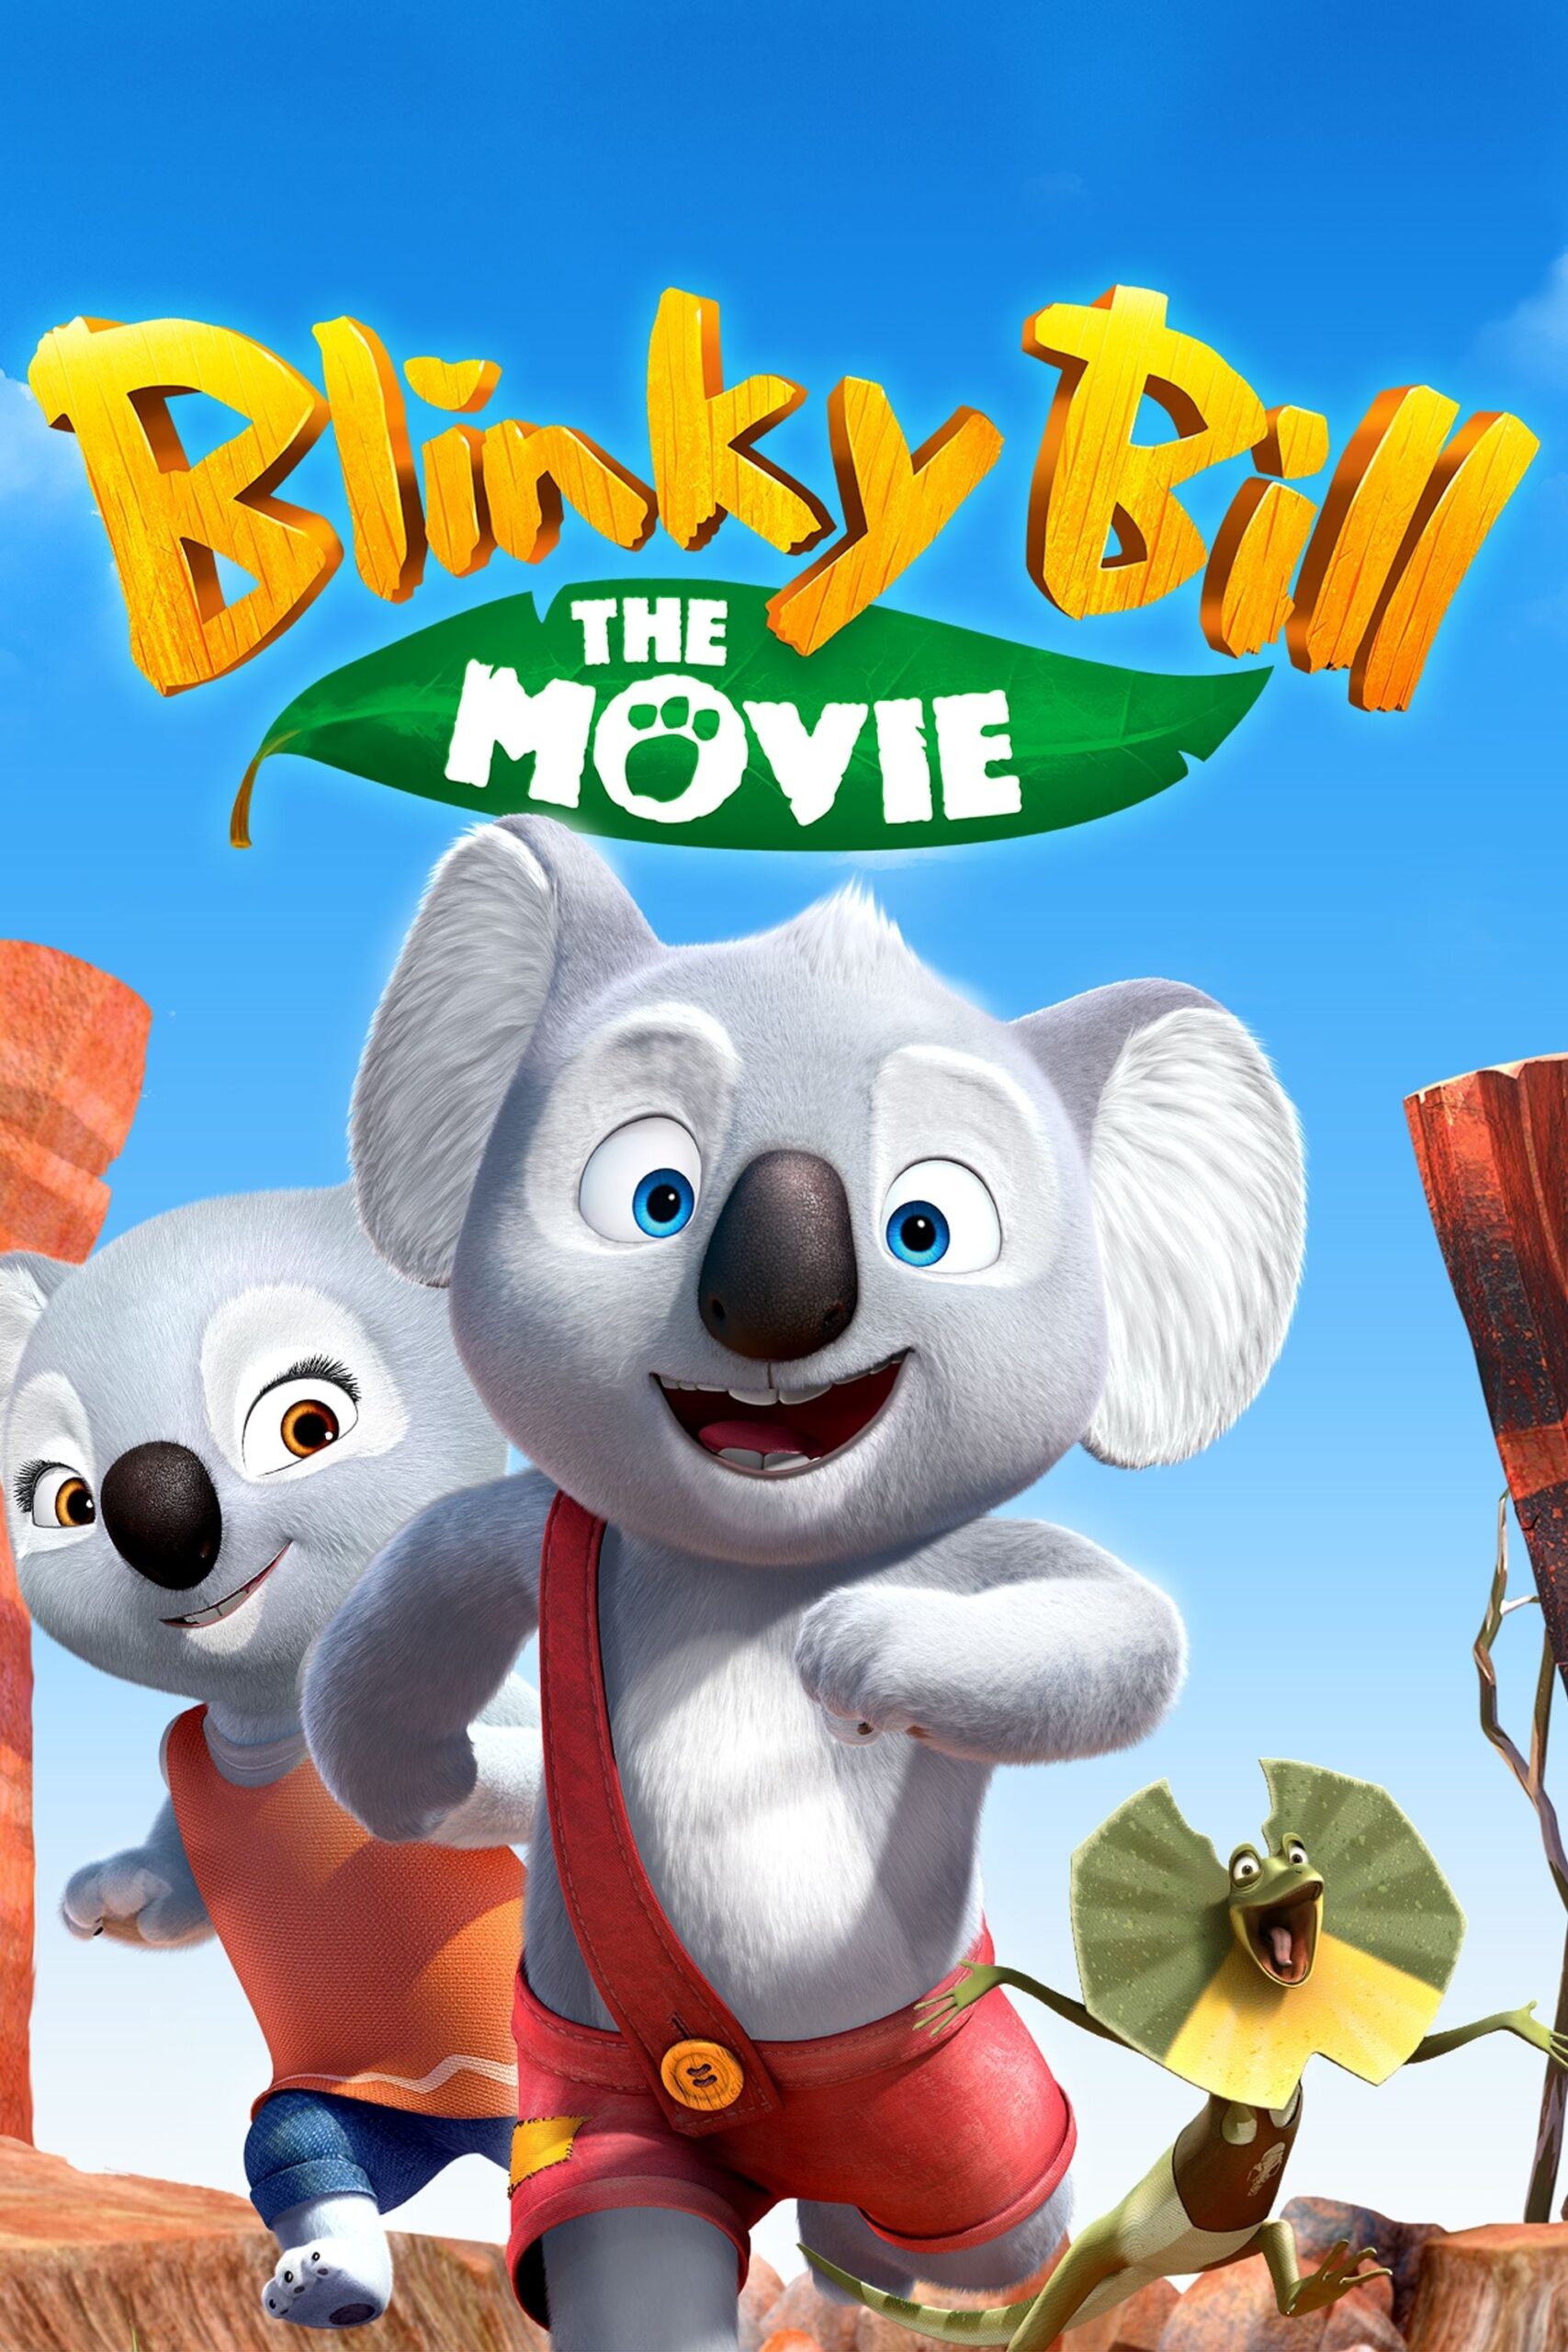 Poster for the movie "Blinky Bill the Movie"